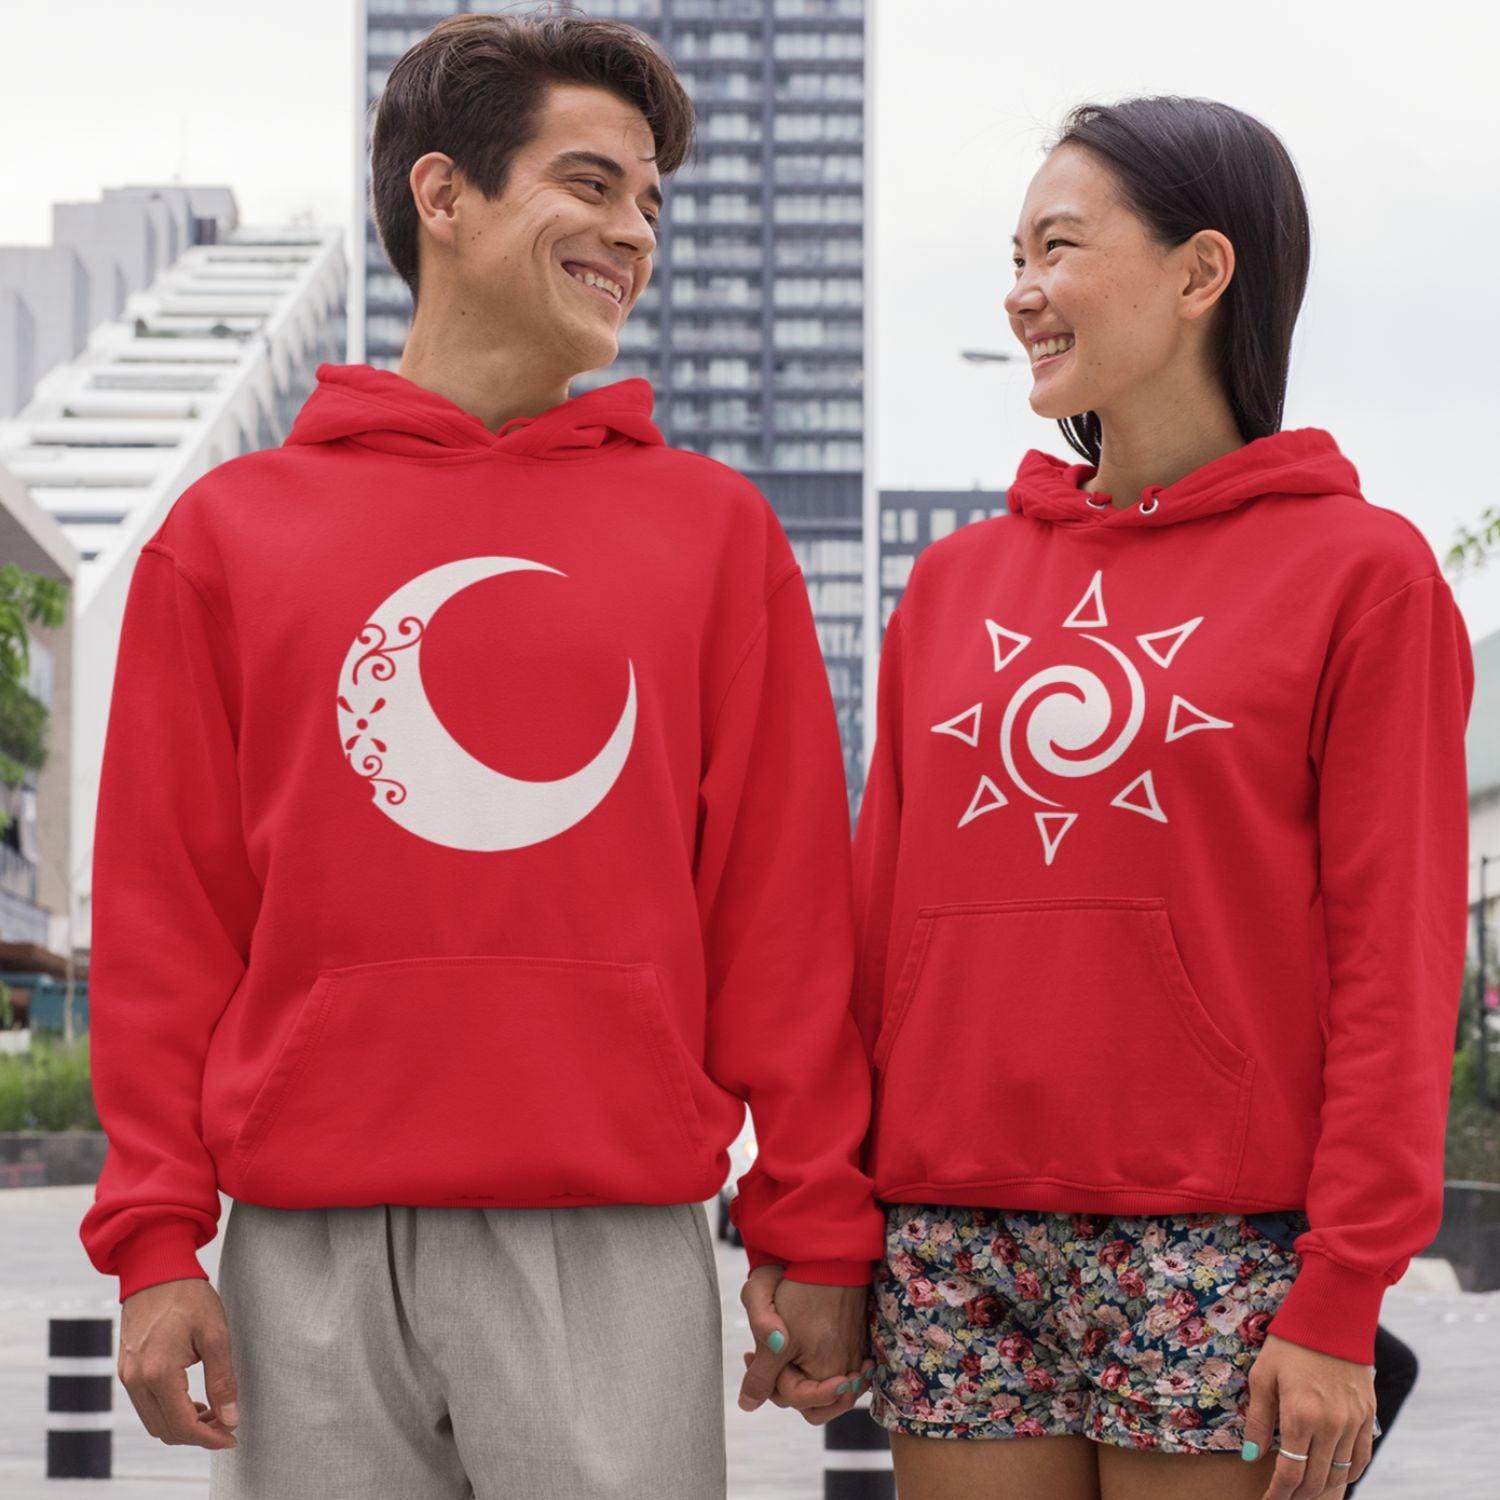 Matching Couple Outfits: Moon Sun, His Hers, Valentines Gift - 4Lovebirds